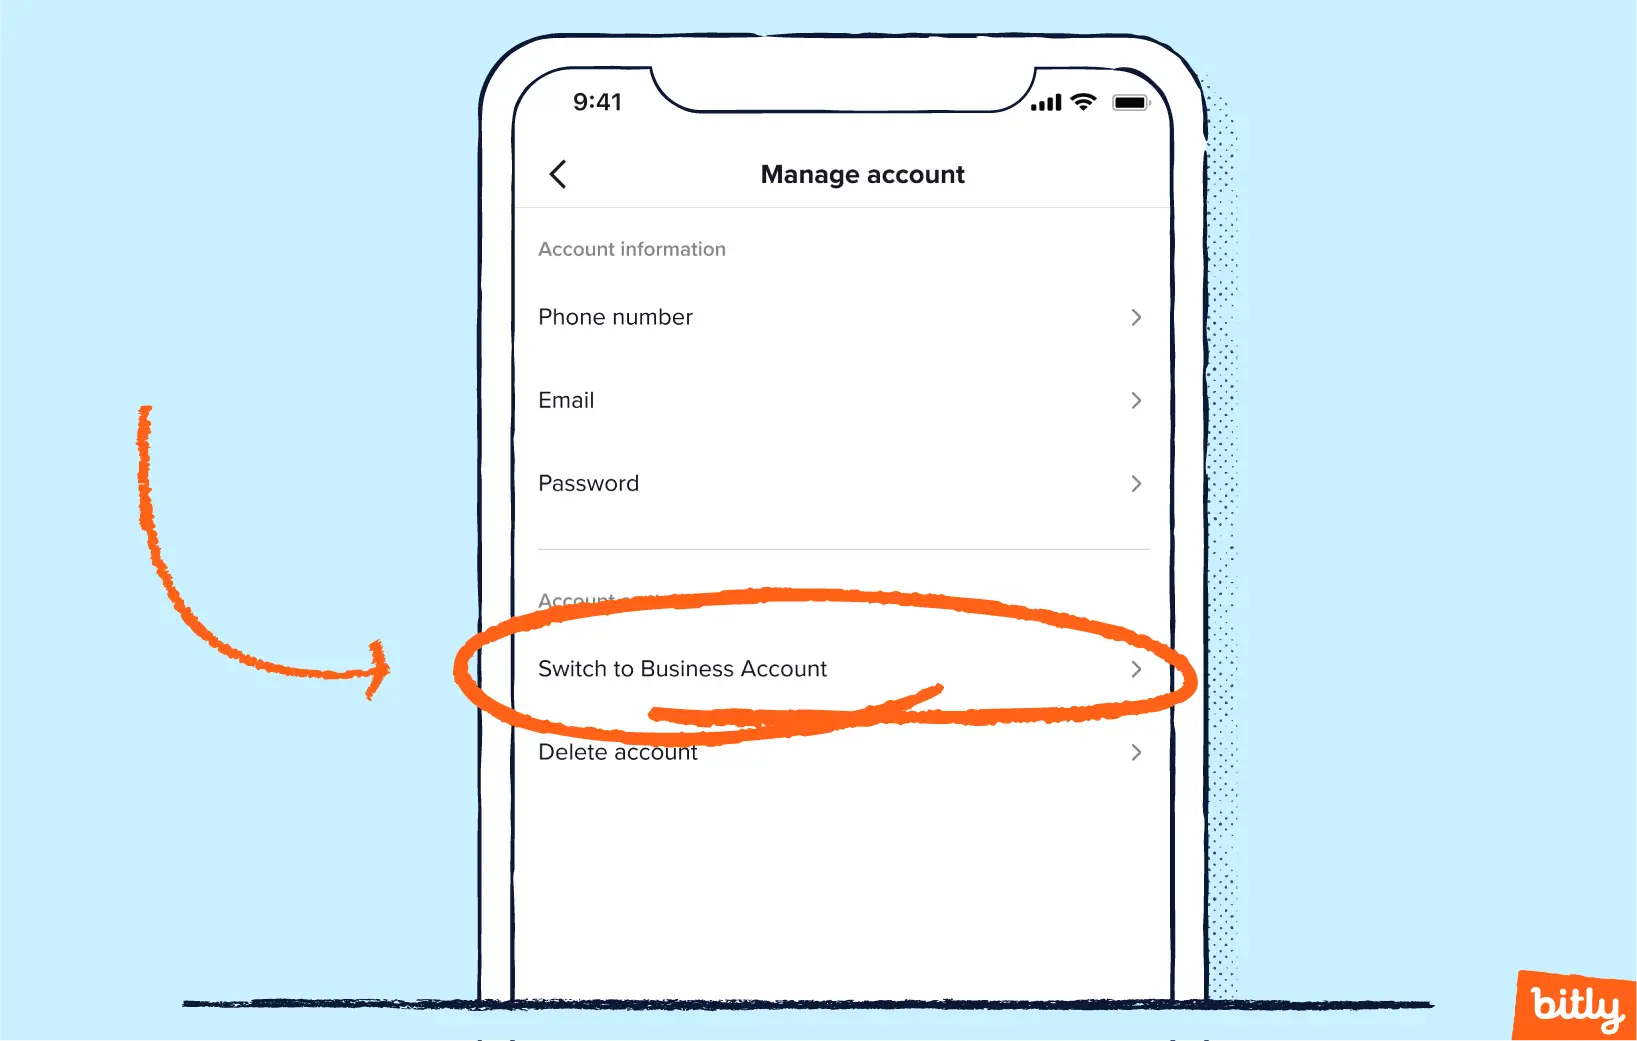 An orange arrow pointing to Switch to Business Account button on a Manage account page on a phone.